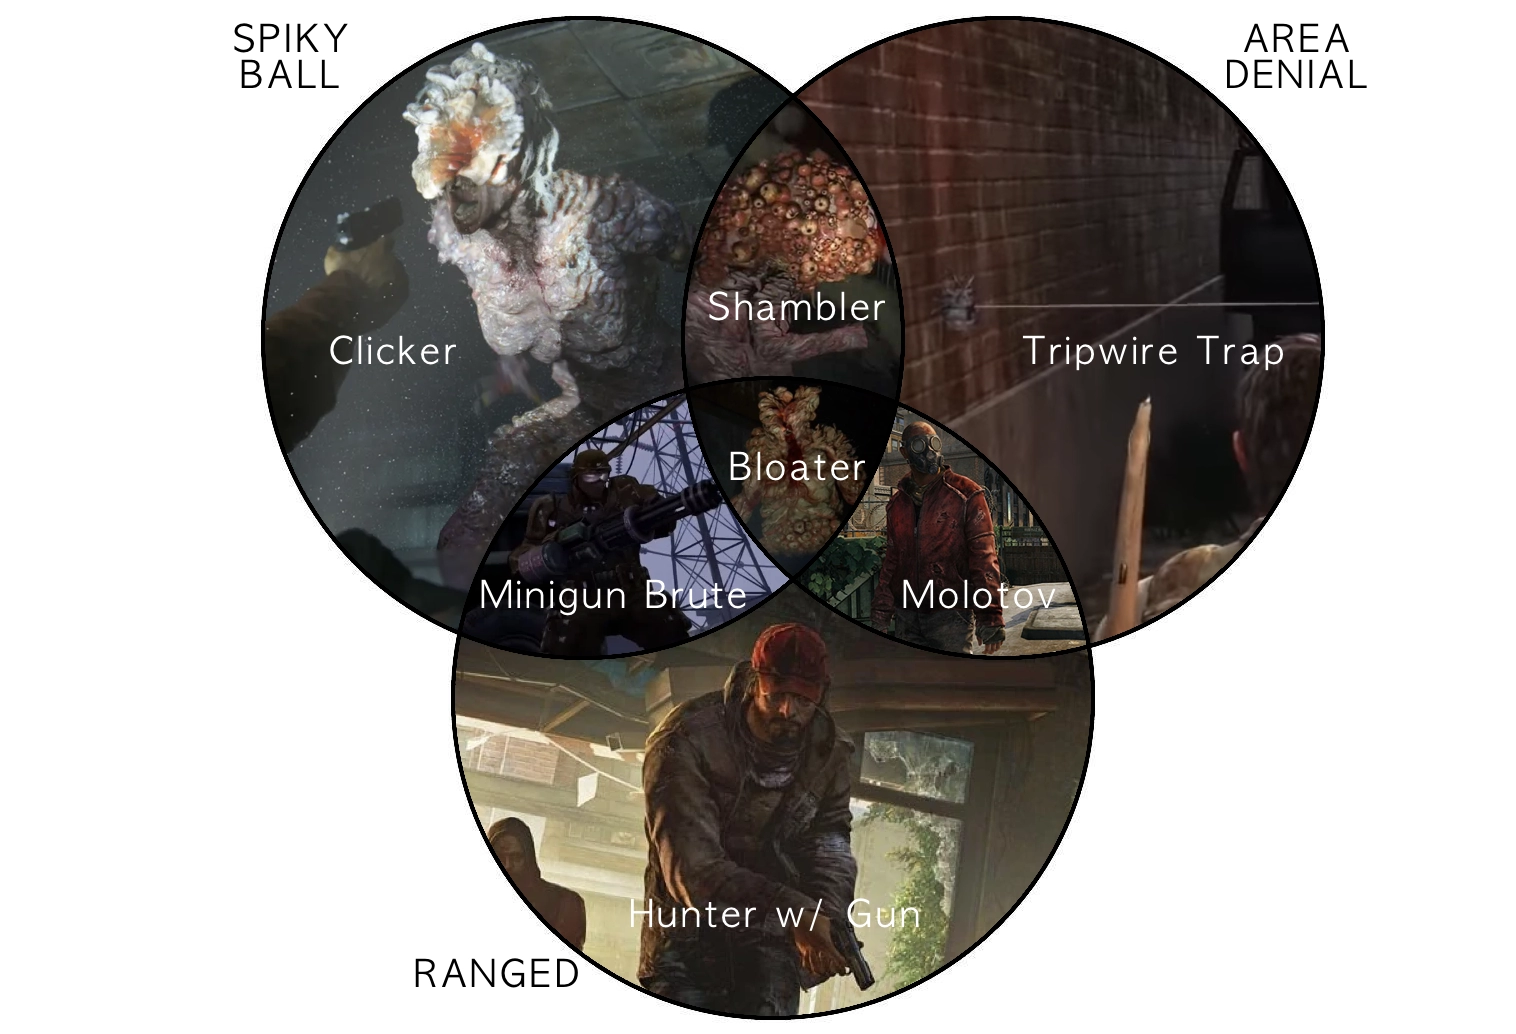 Venn diagram of various enemy types. Clickers are a spiky ball.